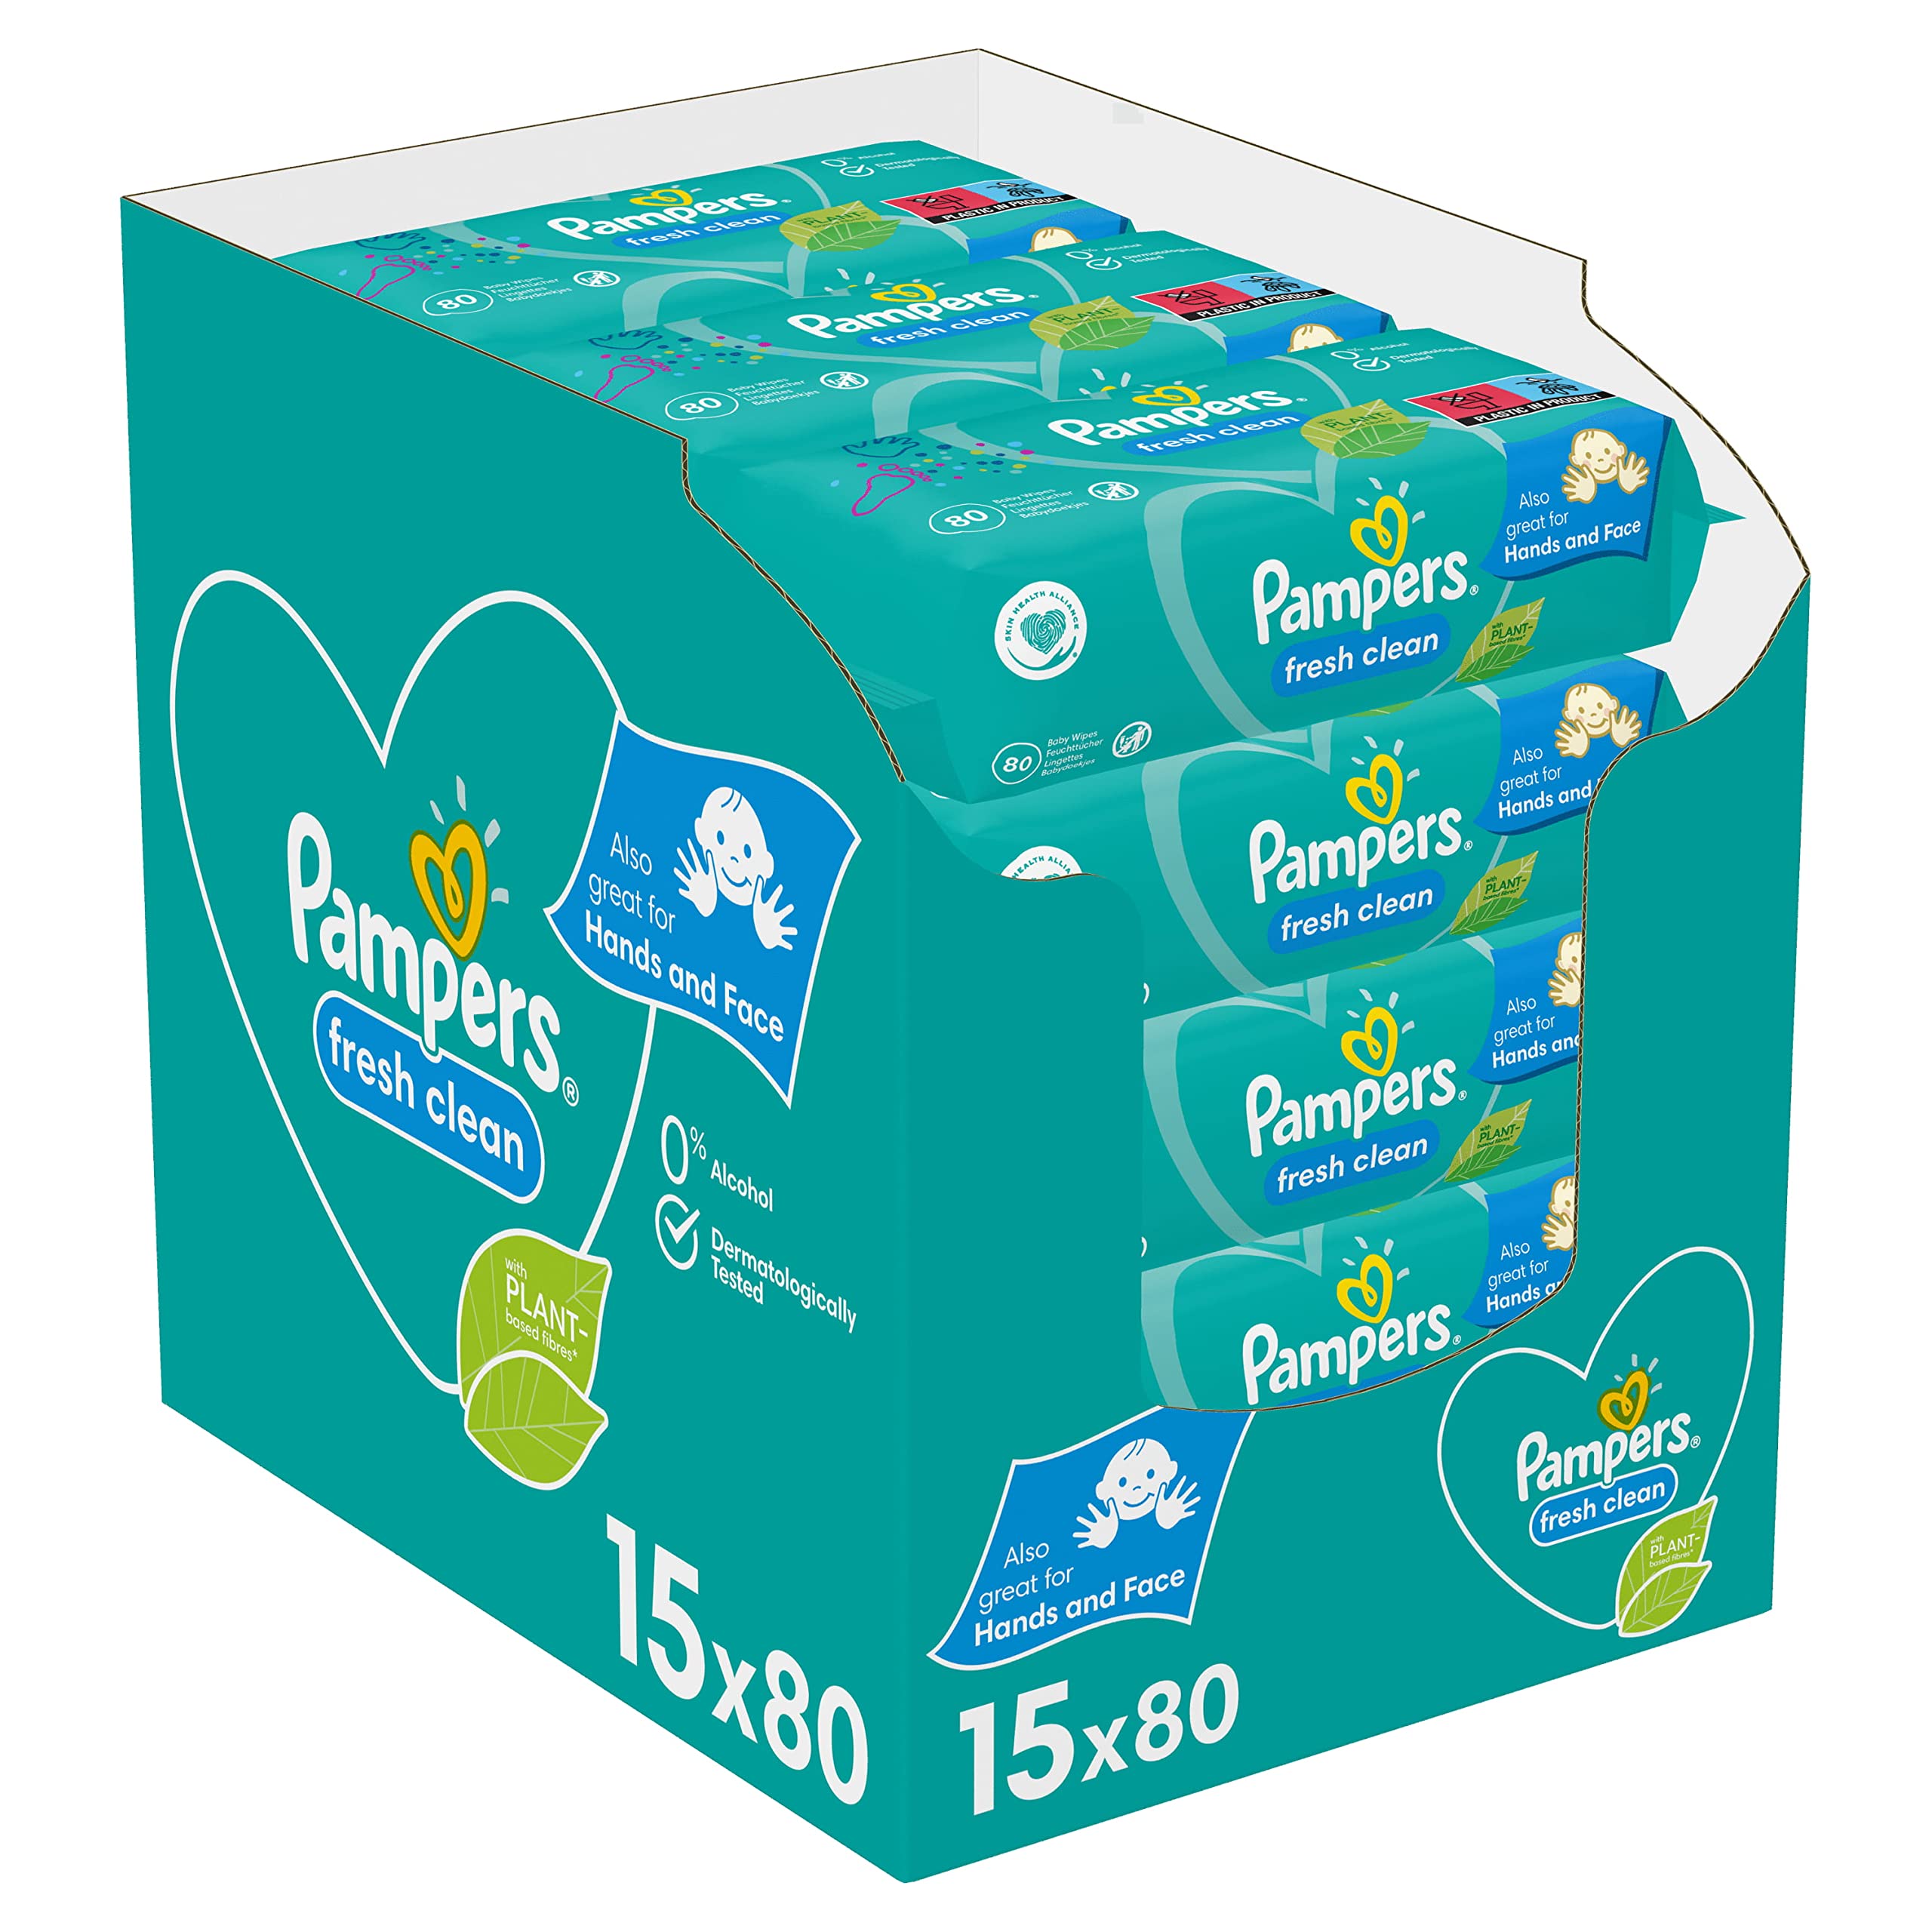 pampers pants 5 promocja carrefour